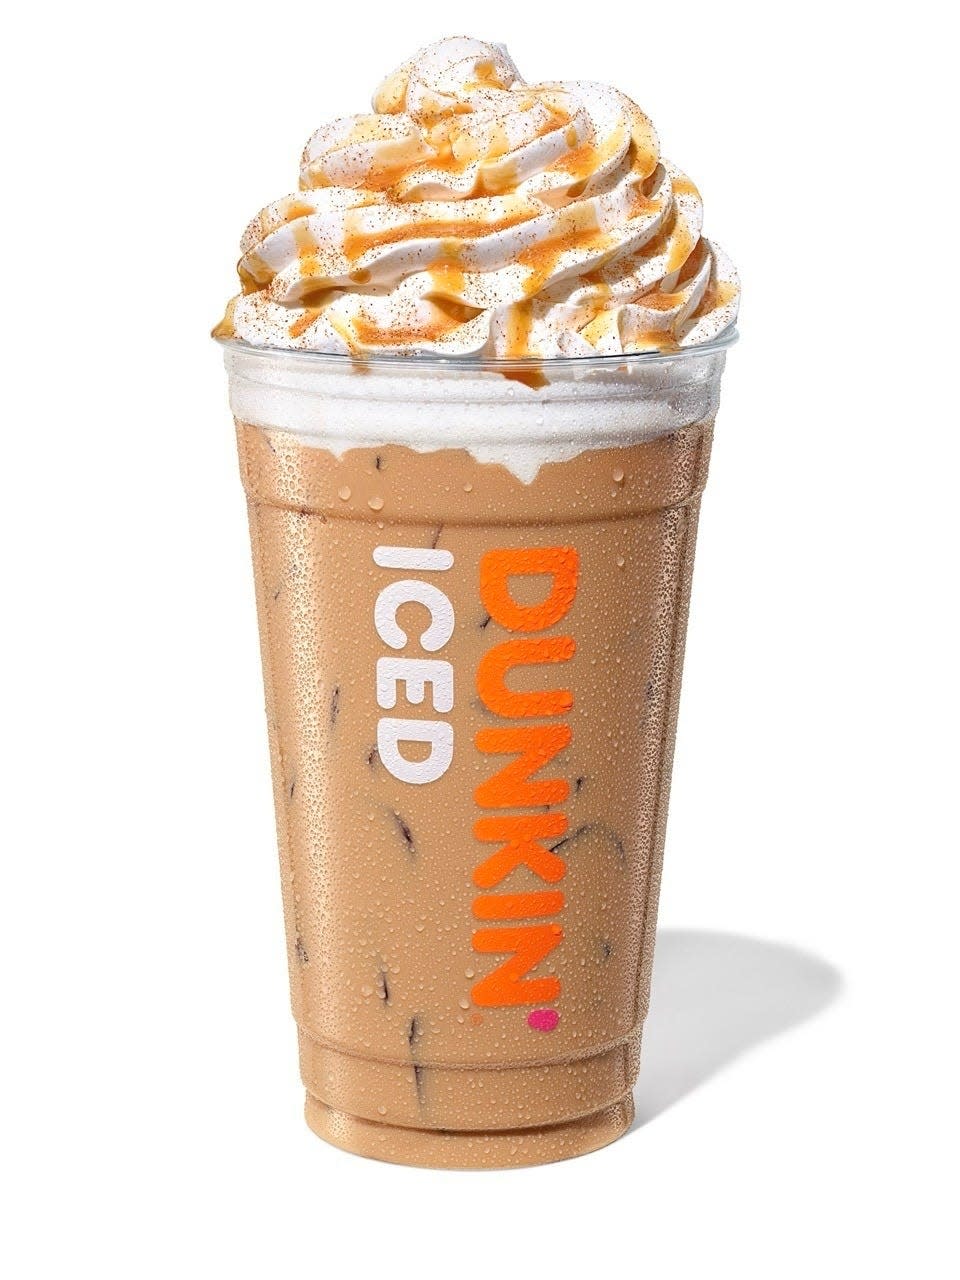 Dunkin' Donuts Pumpkin Spice Signature Latte. Served hot or iced, the latte features notes of sweet pumpkin, vanilla and fall spices.